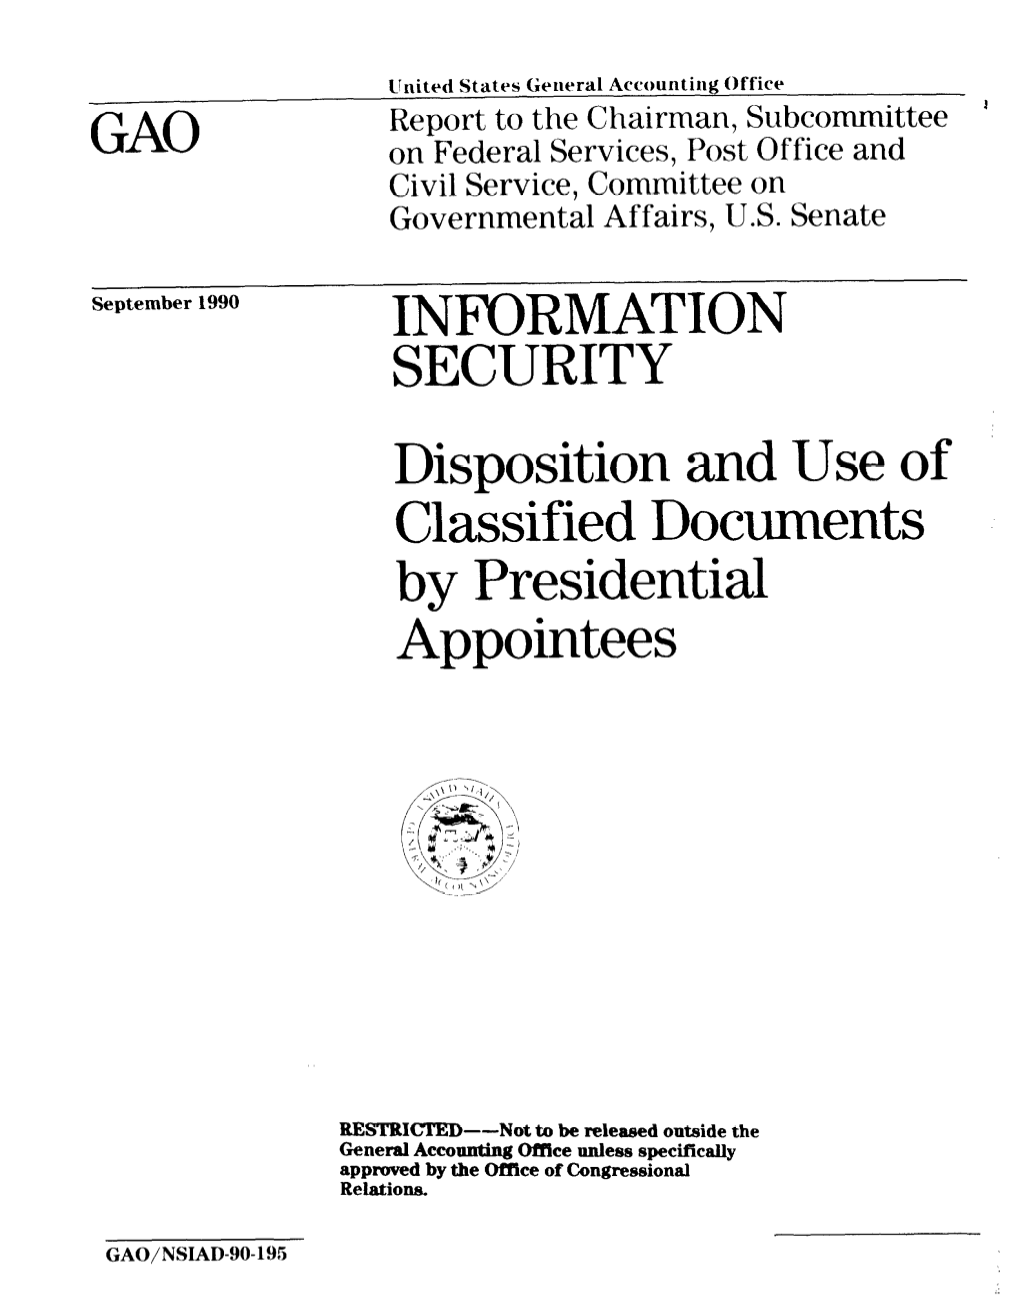 NSIAD-90-195 Information Security: Disposition and Use of Classified Documents by Presidential Appointees